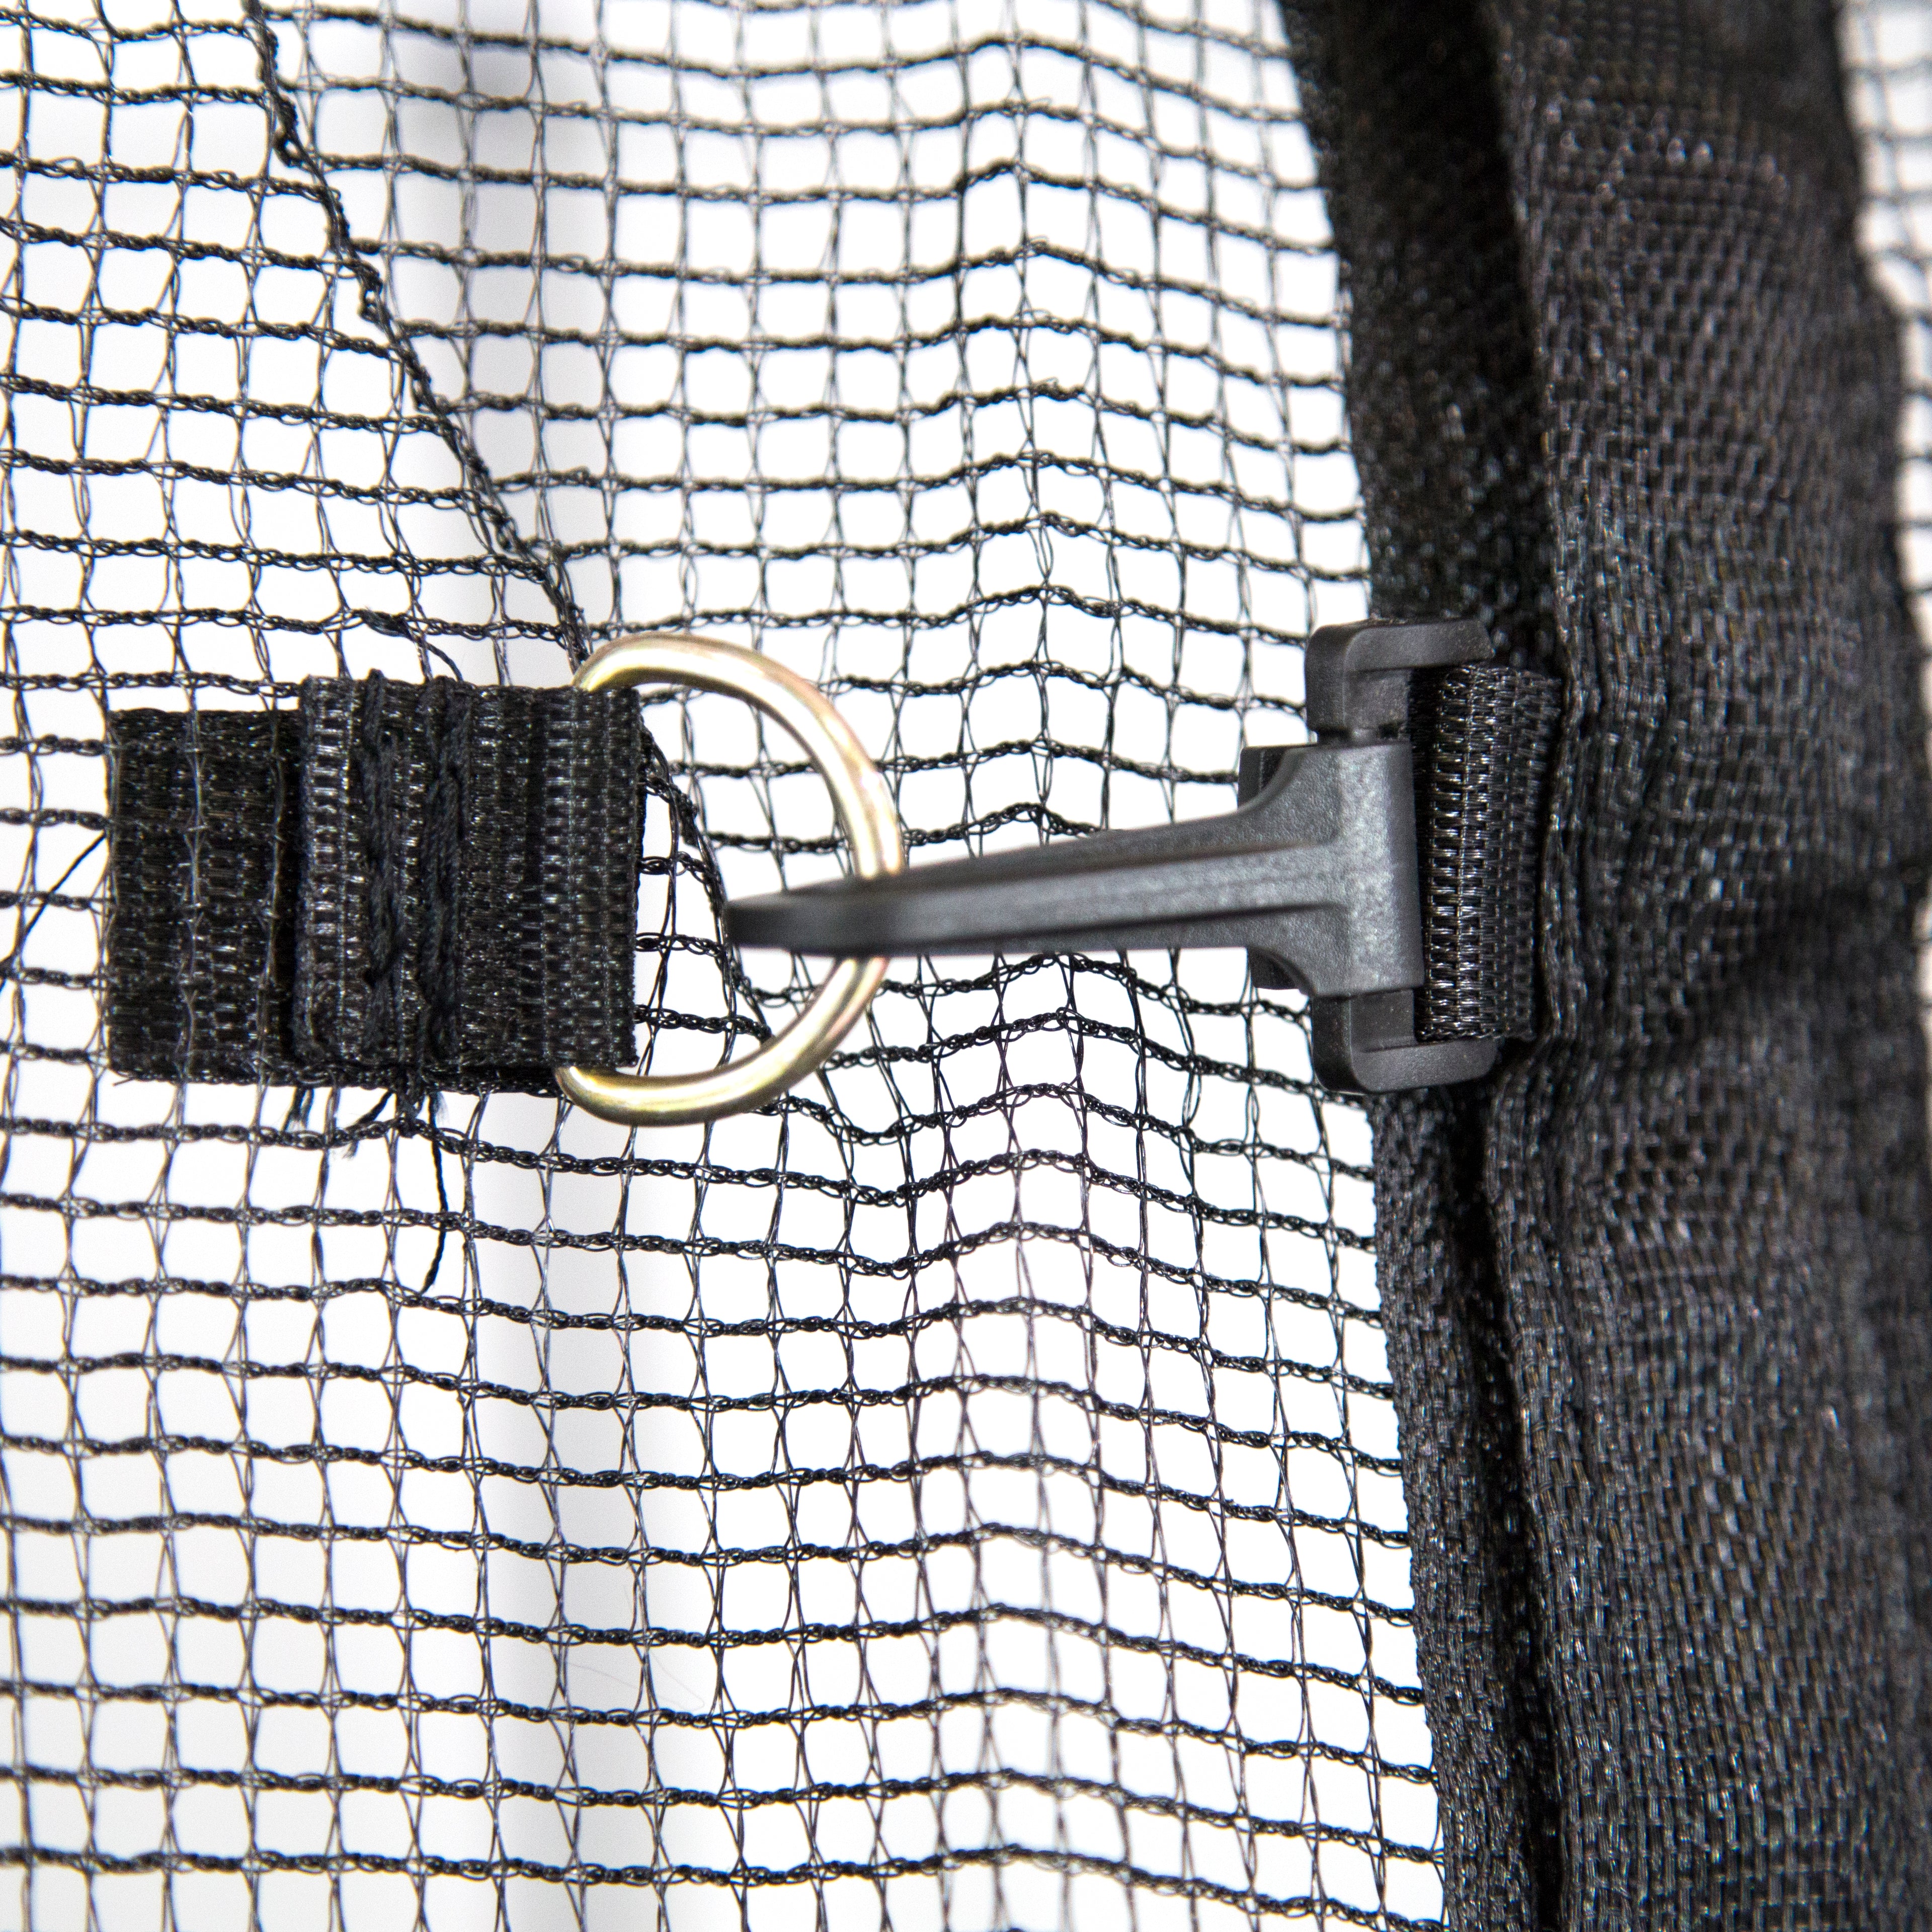 Black clip and zipper both keep the trampoline's enclosure net closed. 